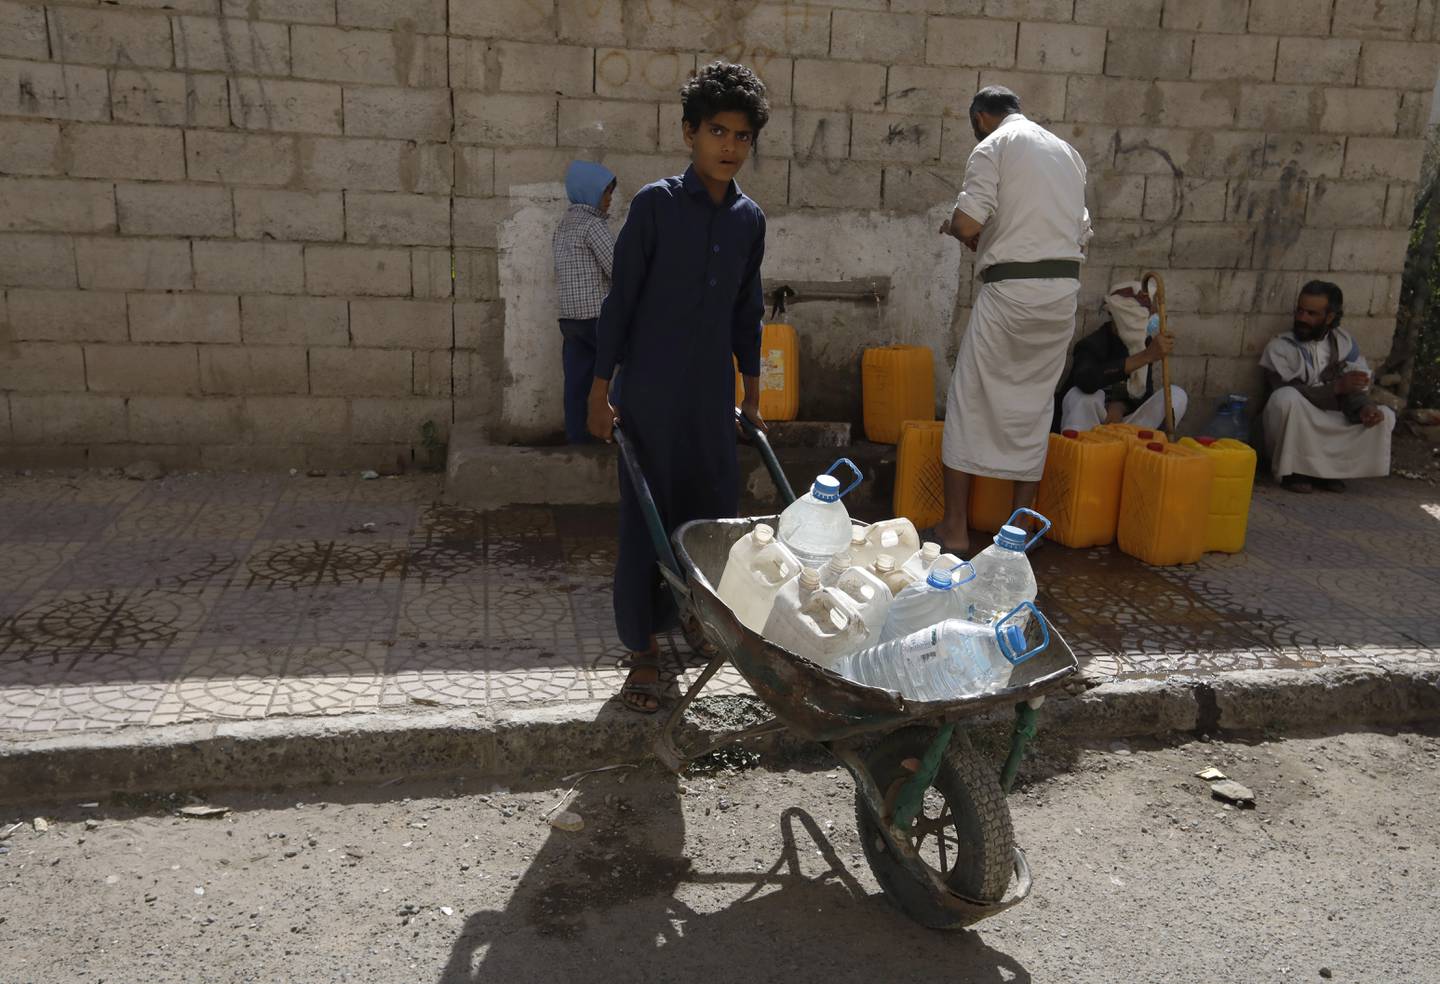 Yemenis collect drinking water from a donated water pipe on the roadside in Sana'a, Yemen, 31 March 2022 (issued 01 April 2022). EPA / YAHYA ARHAB